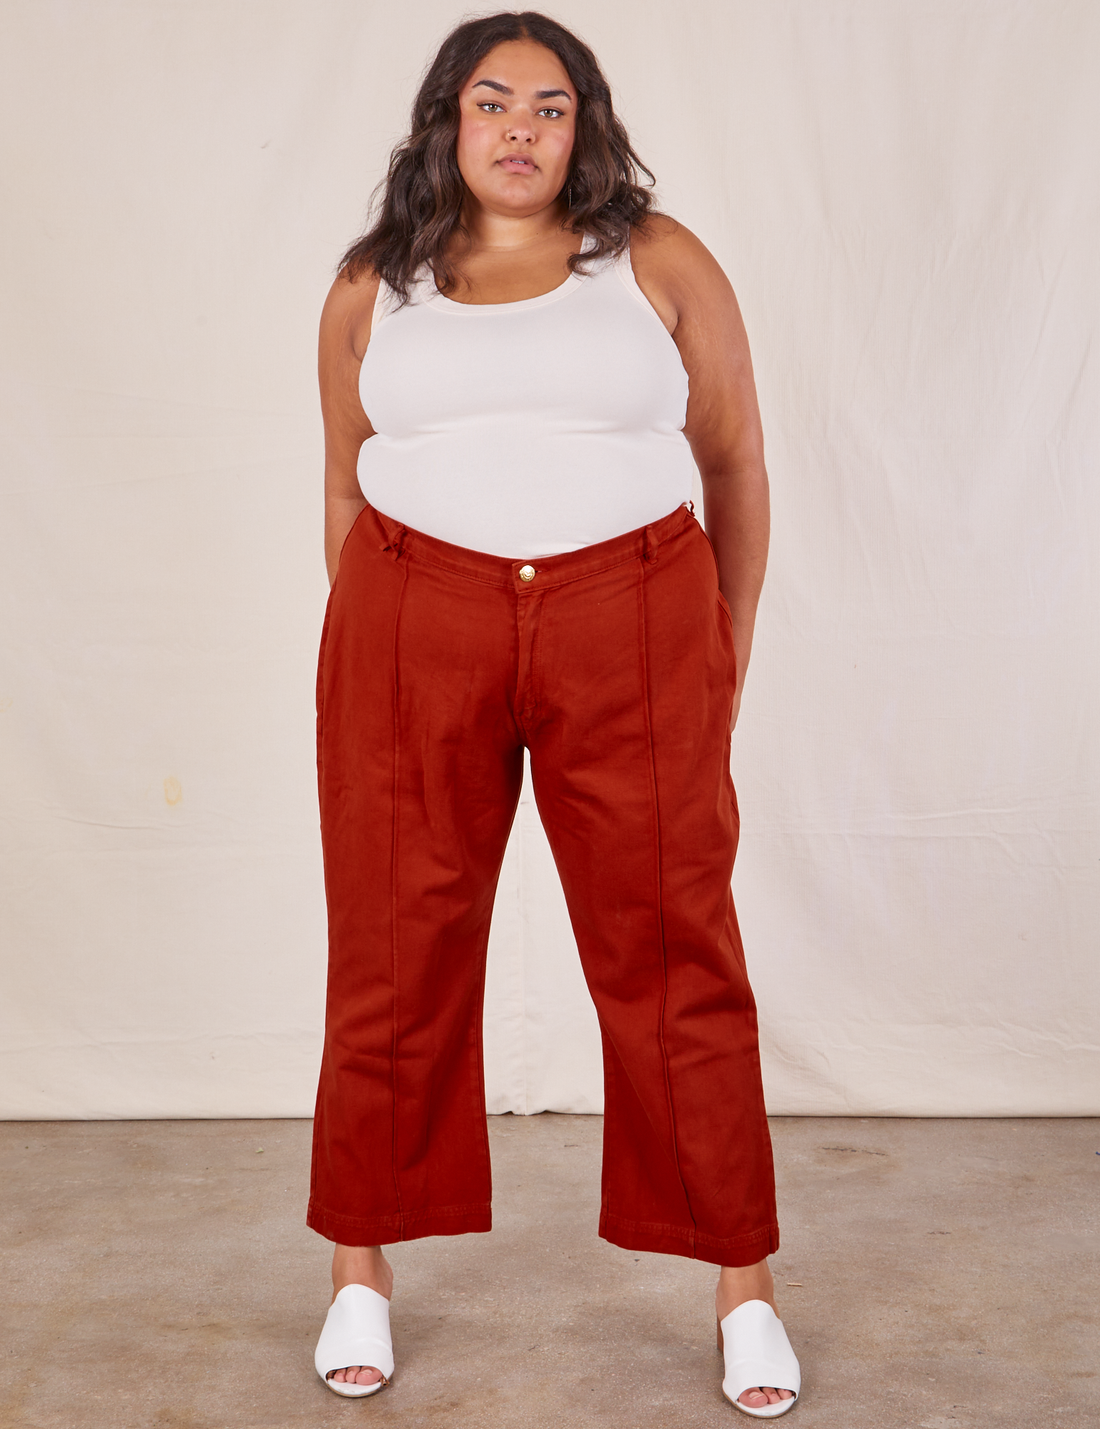 Alicia is wearing Western Pants in Paprika and a vintage off-white Tank Top